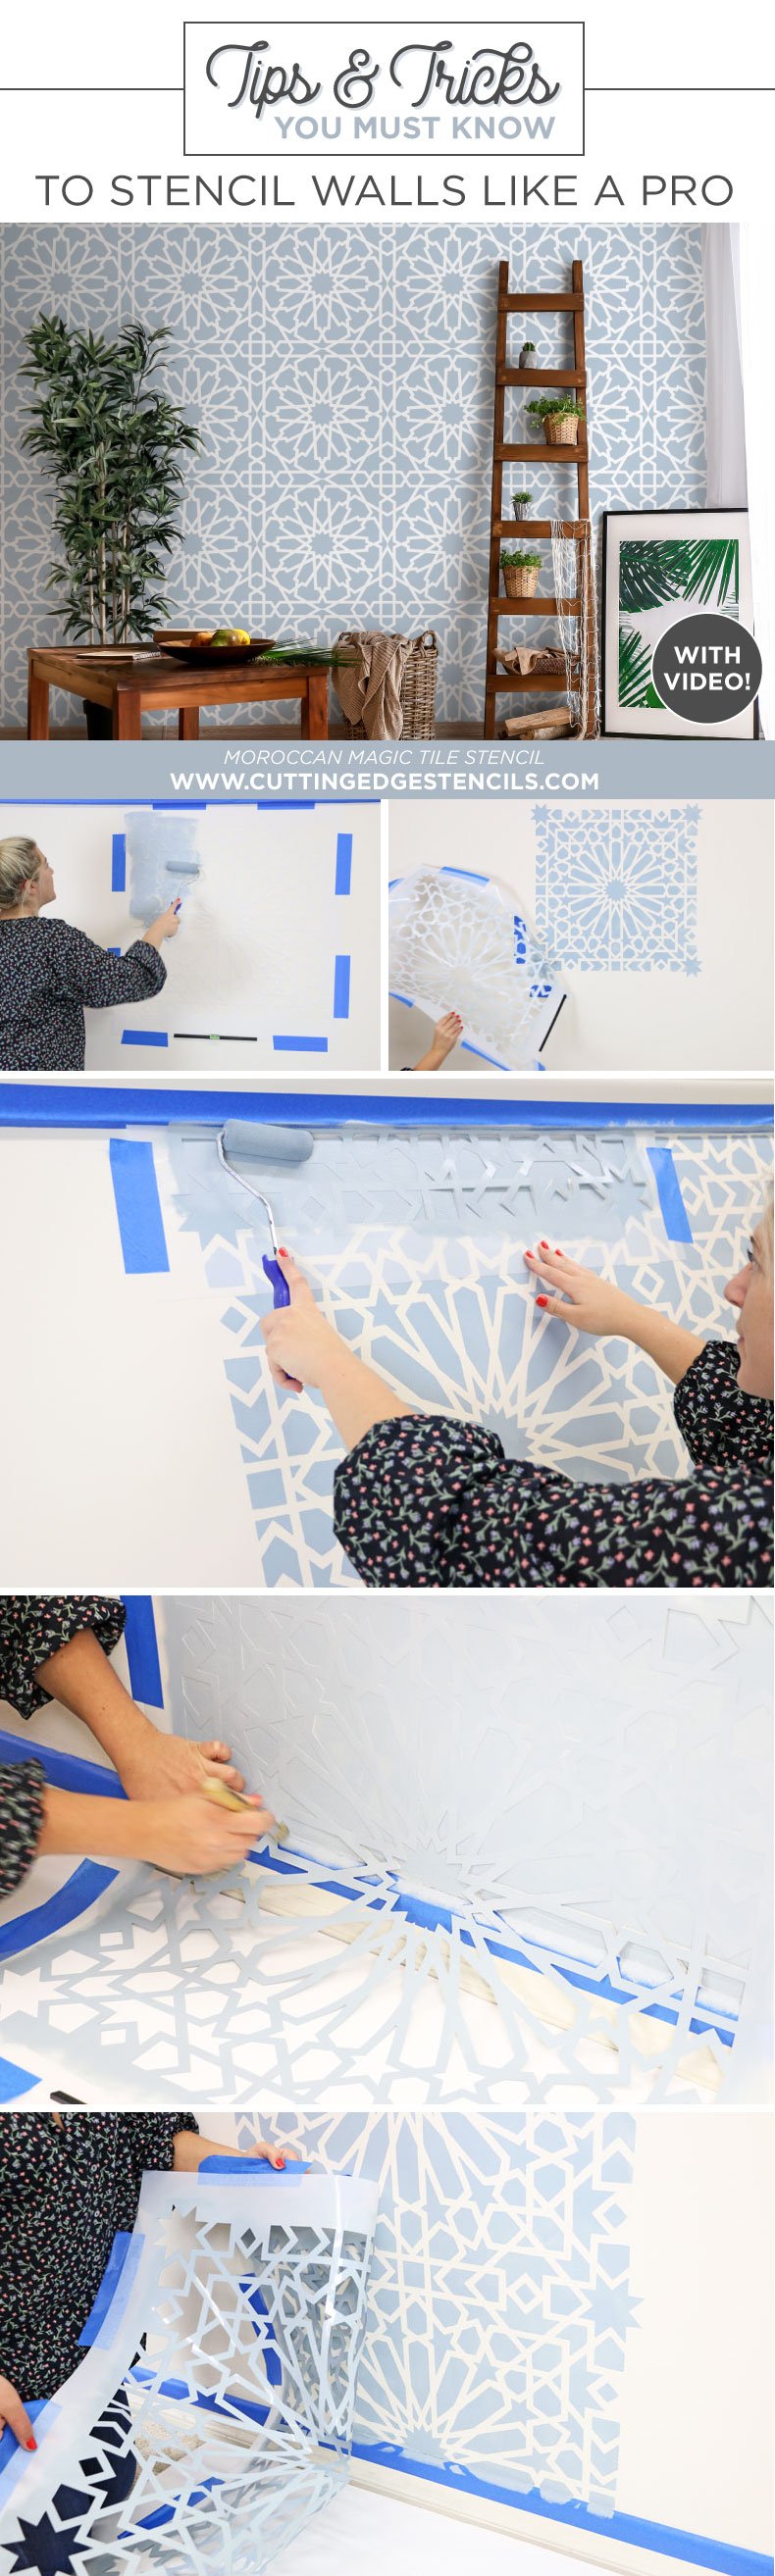 Tips & Tricks You Must know to Stencil Walls like a Pro - Stencil Stories